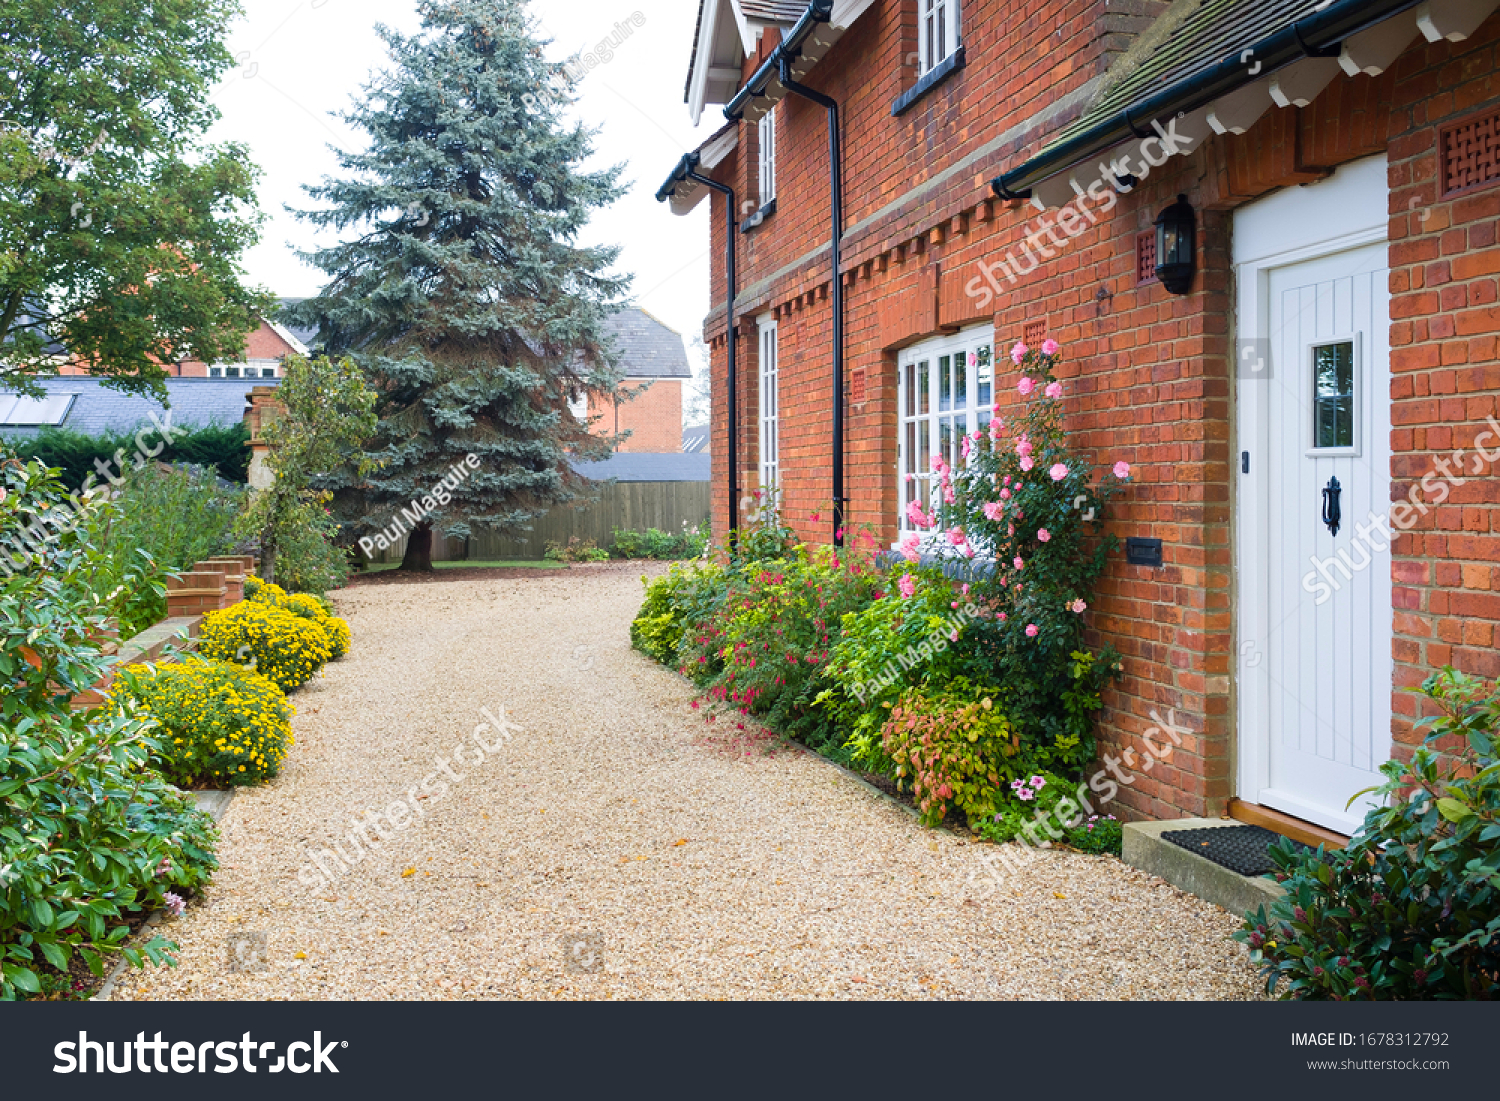 English country house and garden in Autumn with a gravel driveway. The house is Victorian period, with flower borders filled with shrubs and perennials #1678312792